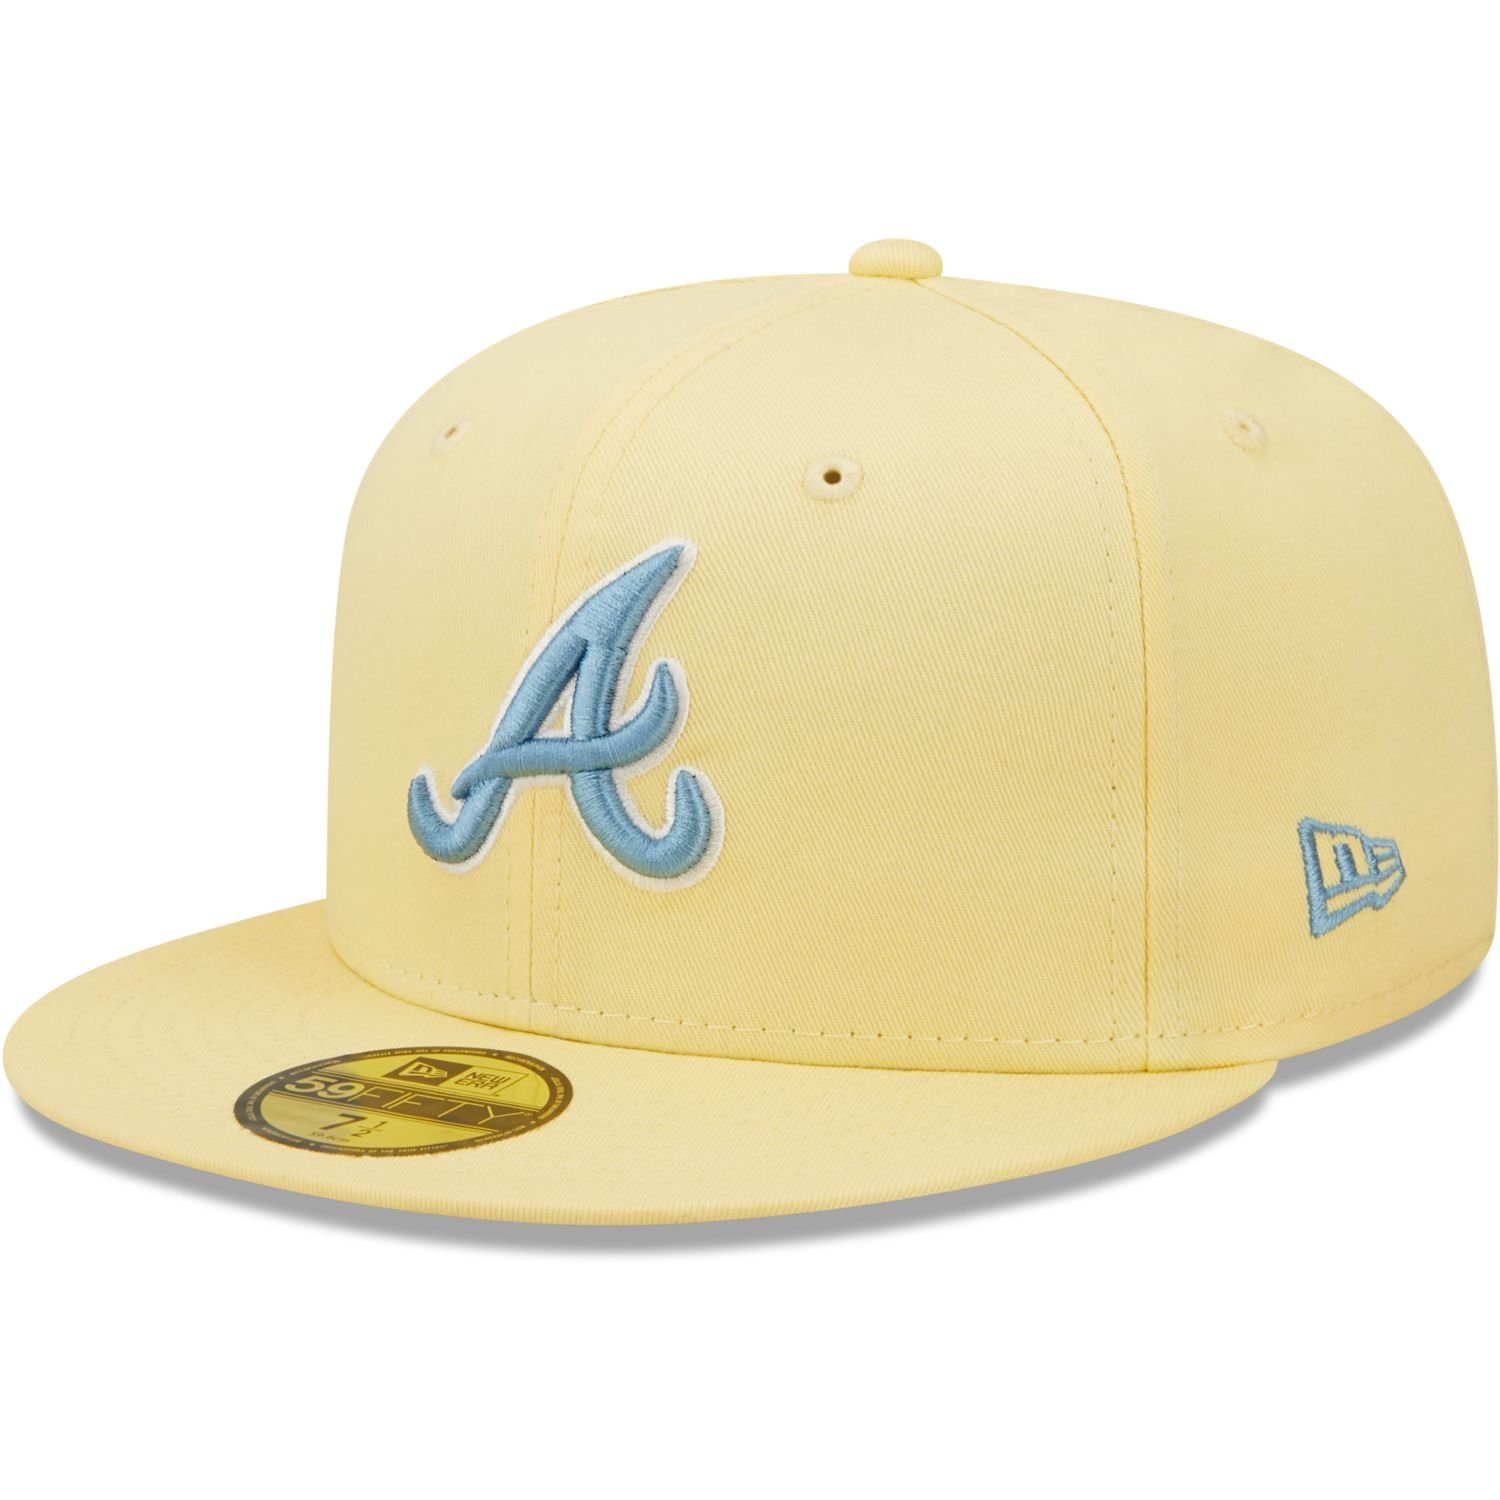 New Era Fitted Cap 59Fifty Braves COOPERSTOWN Atlanta